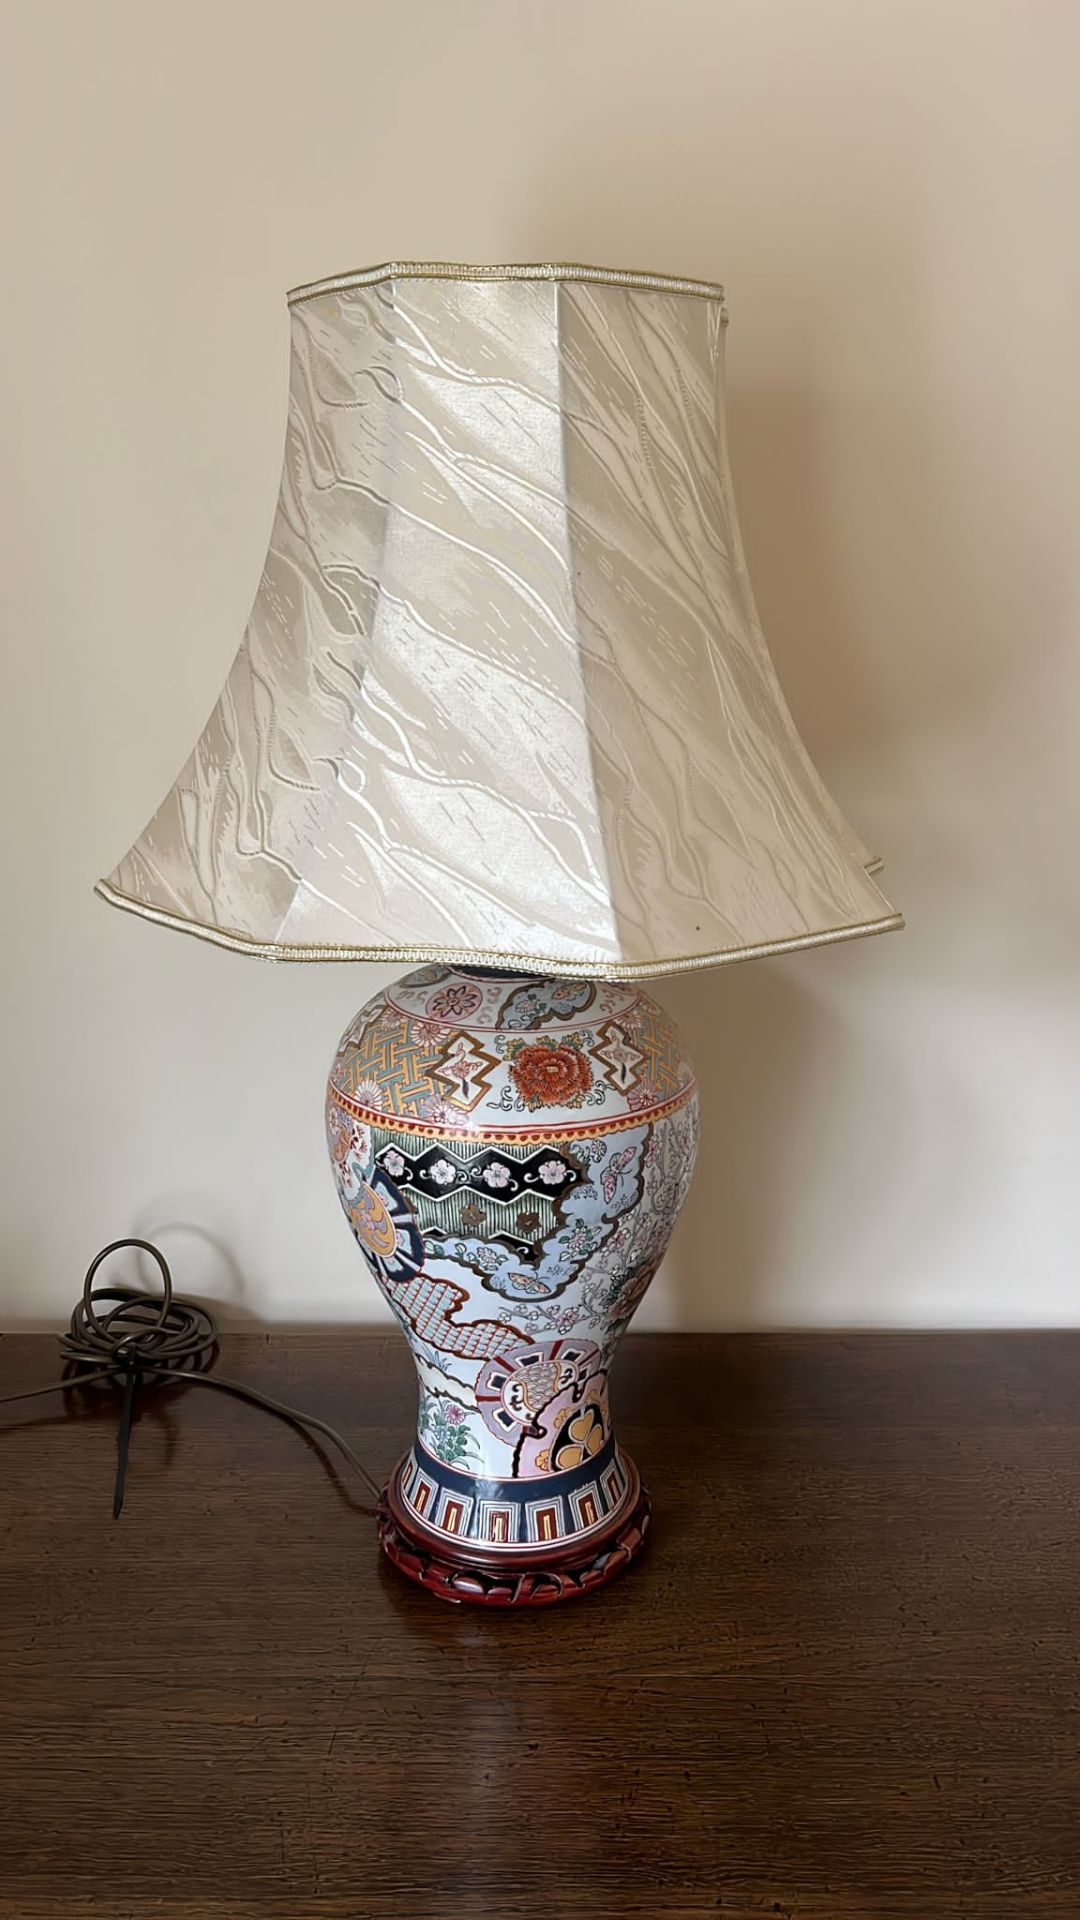 A CHINESE ENAMEL DESIGN TABLE LAMP WITH GEOMETRIC AND FLORAL DESIGNS, ON CARVED WOODEN BASE AND - Image 3 of 5